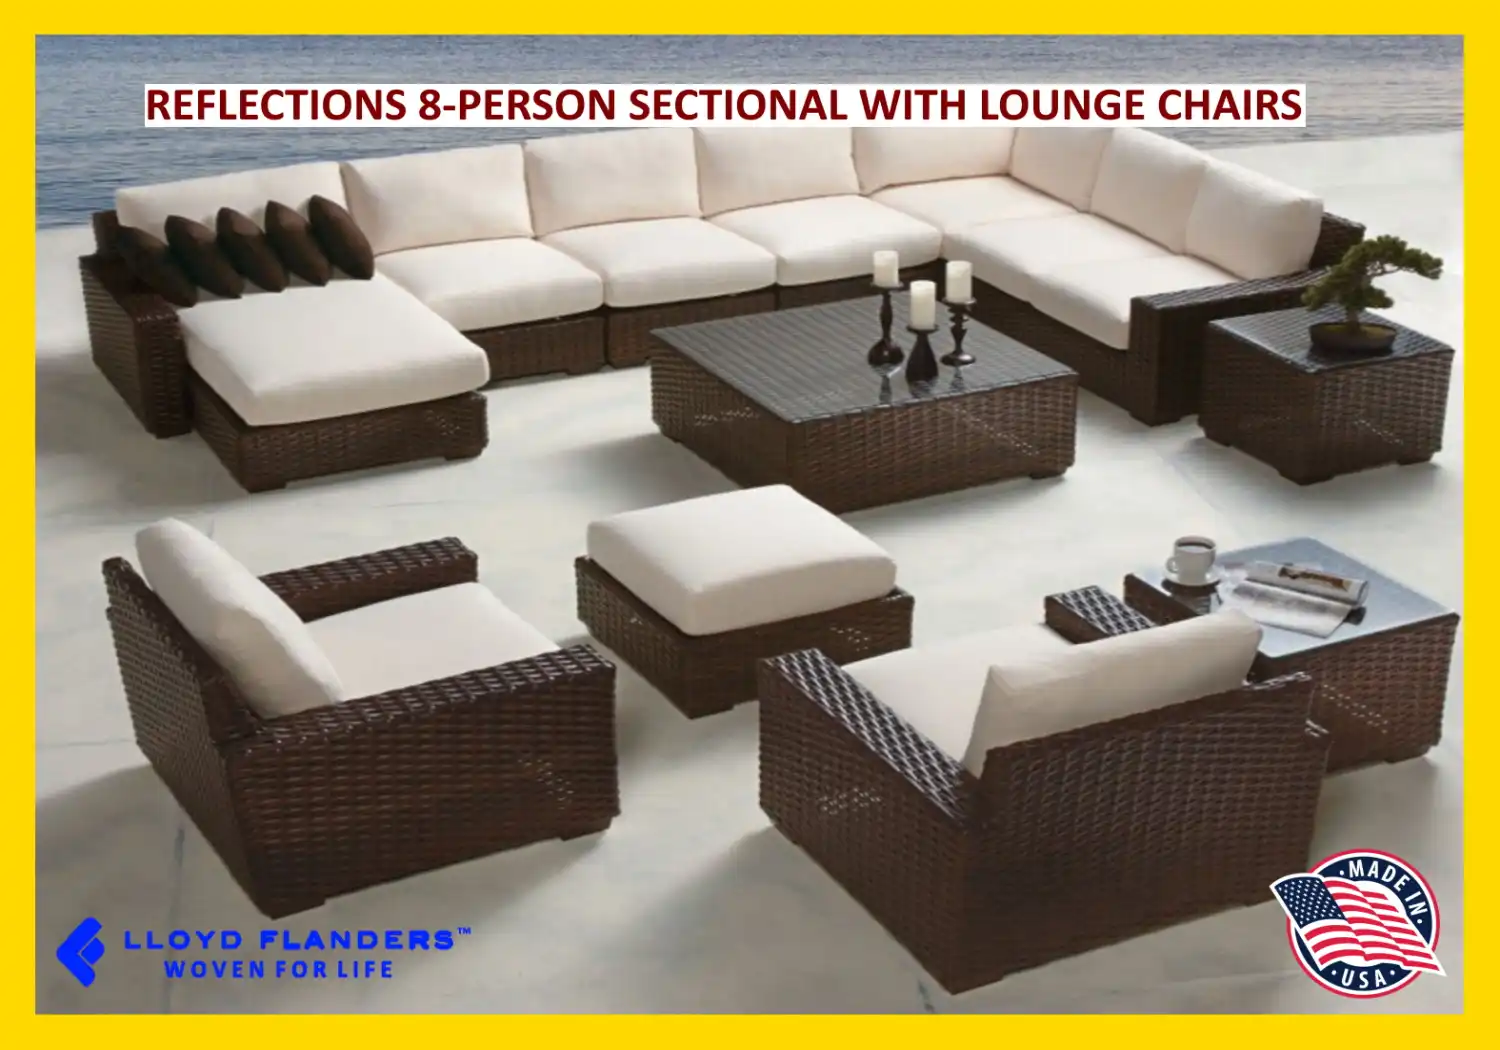 REFLECTIONS 8-PERSON SECTIONAL WITH LOUNGE CHAIRS